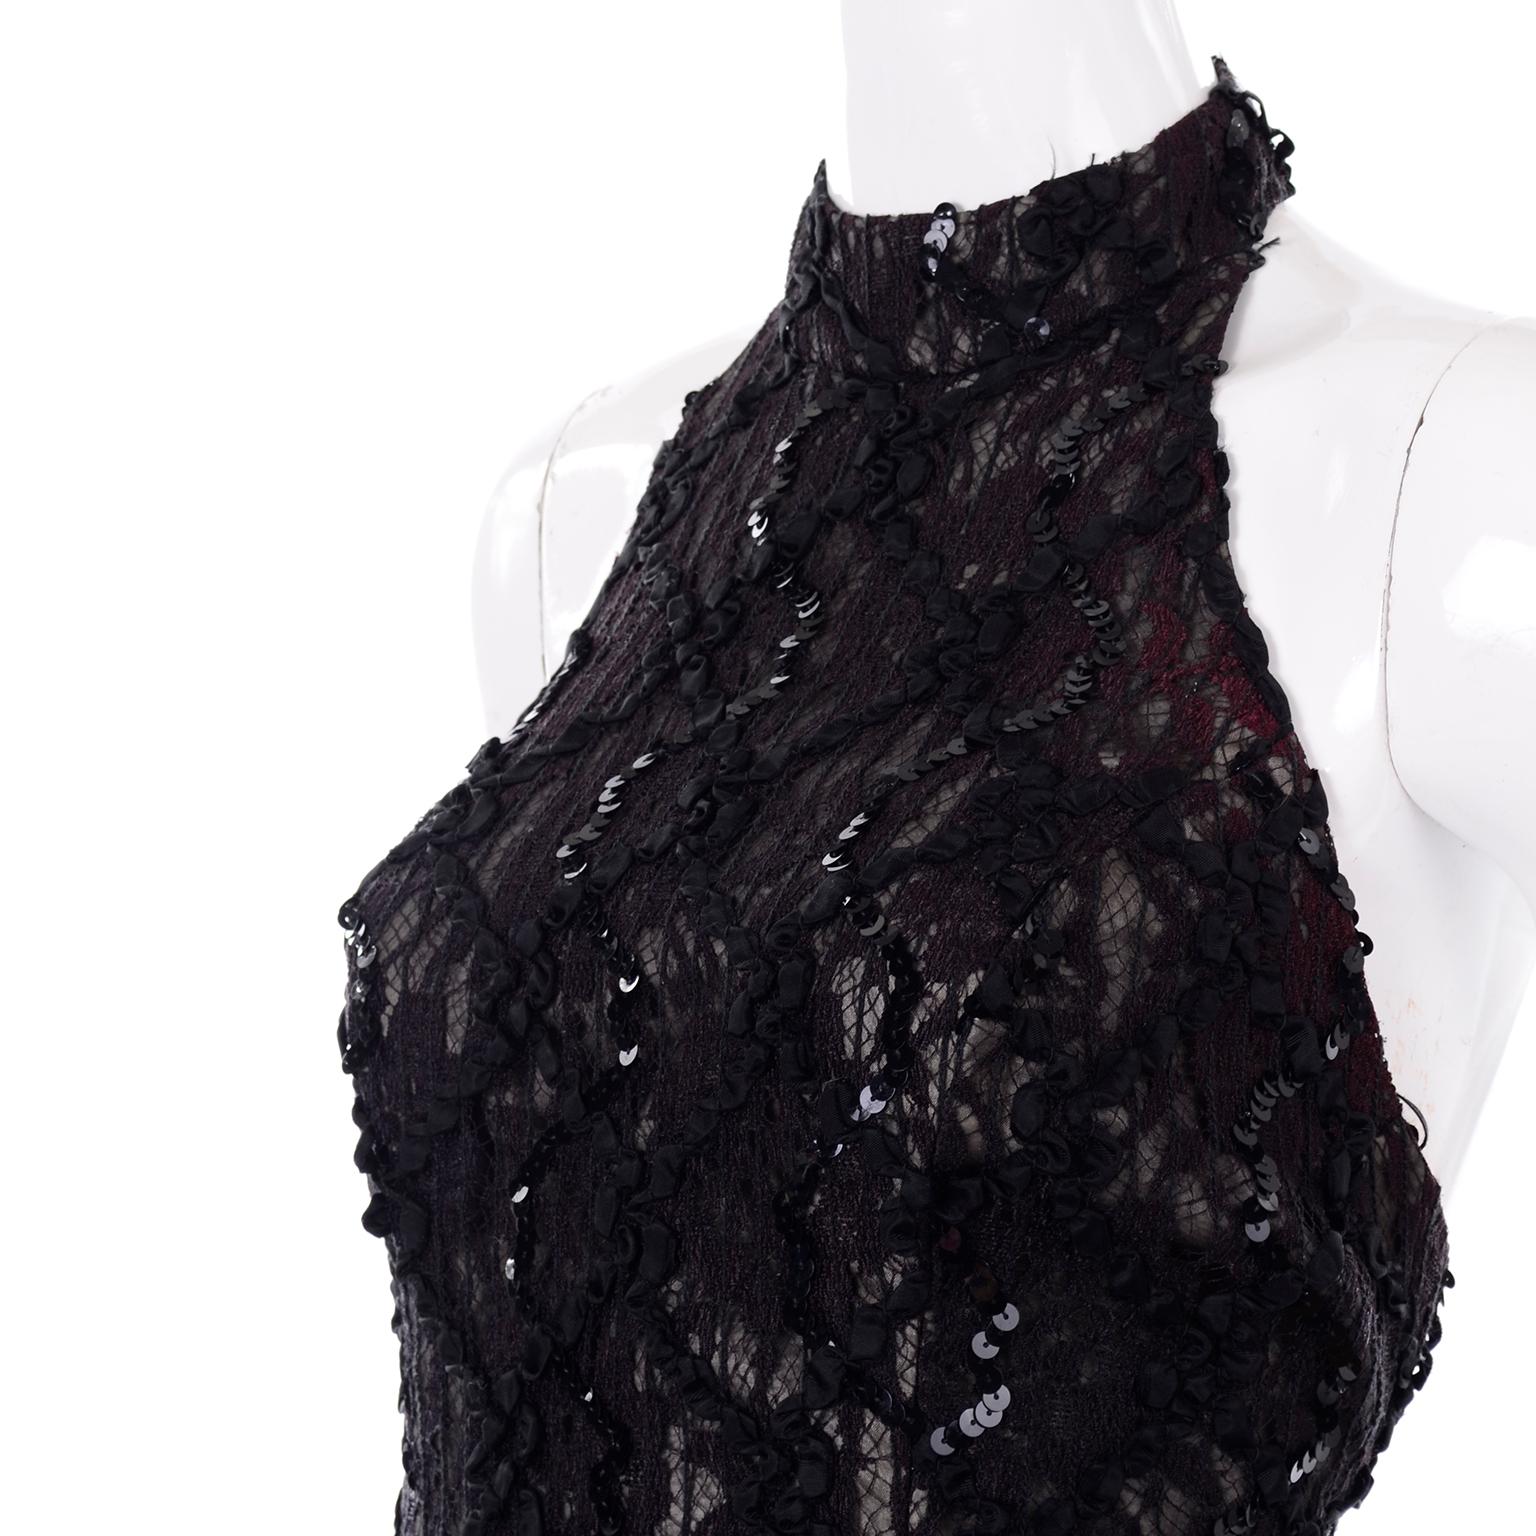 Vintage 1980s Black Lace Sequin Halter Evening Dress w Feathers and Open Back 1